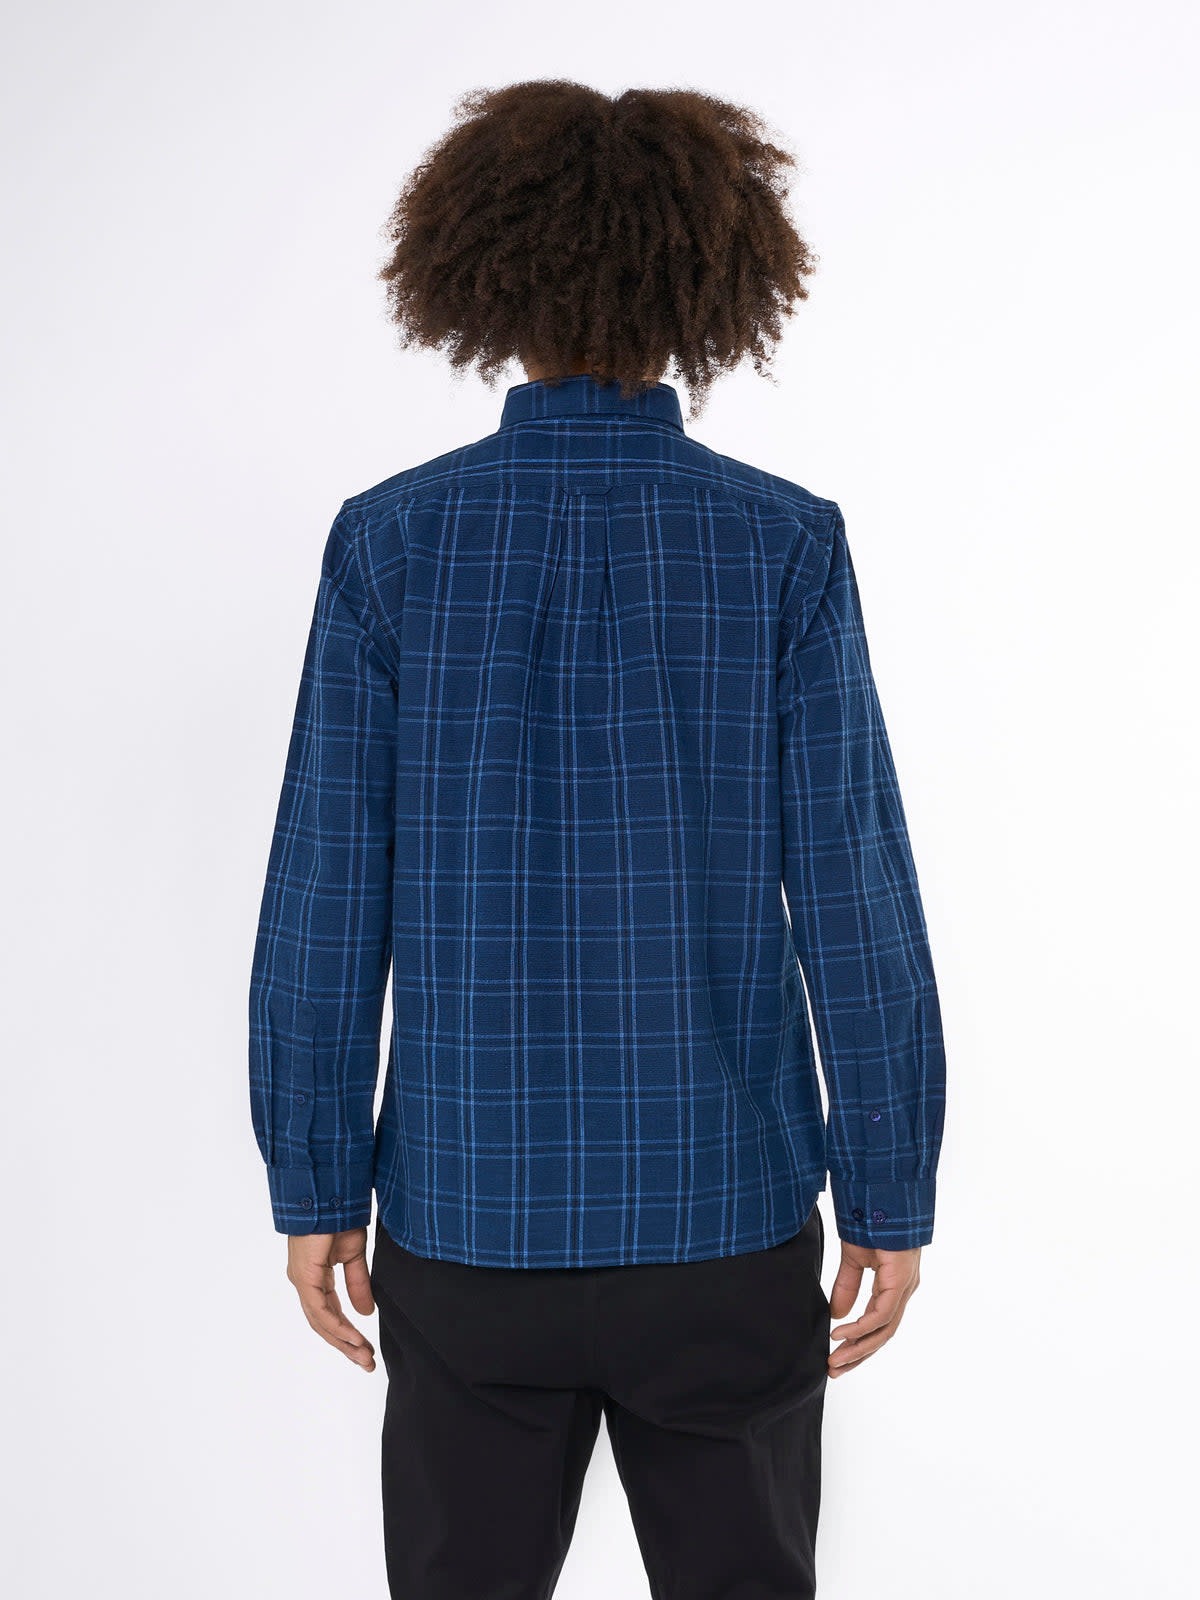 KnowledgeCotton Apparel KnowledgeCotton, Costum Checked Linen, navy check, S